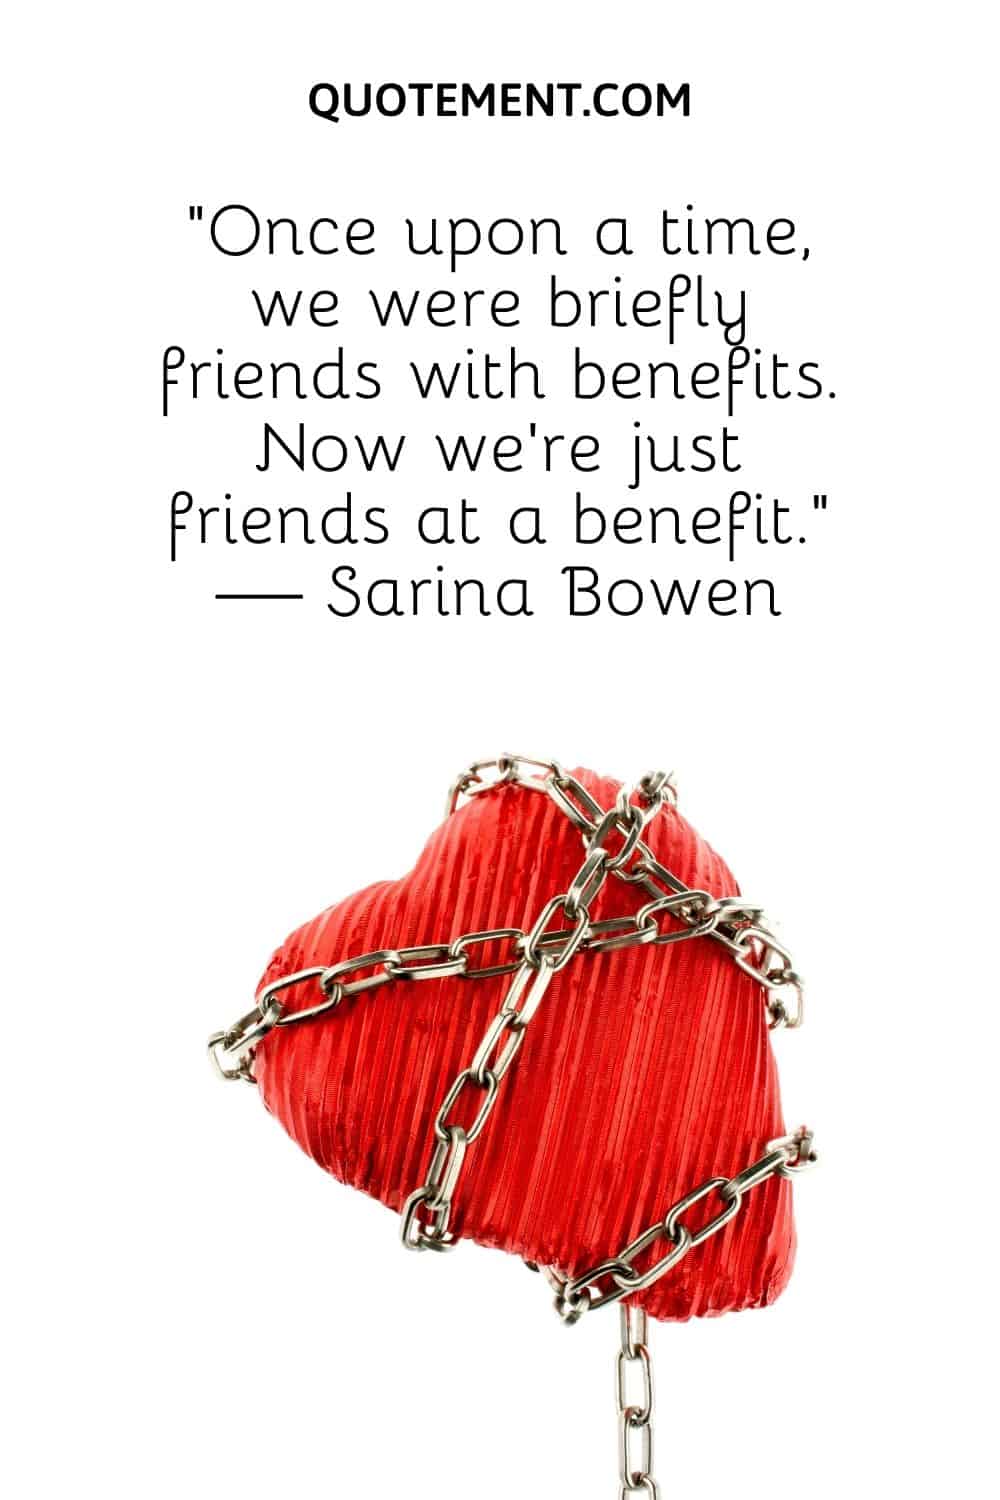 “Once upon a time, we were briefly friends with benefits. Now we’re just friends at a benefit.” — Sarina Bowen